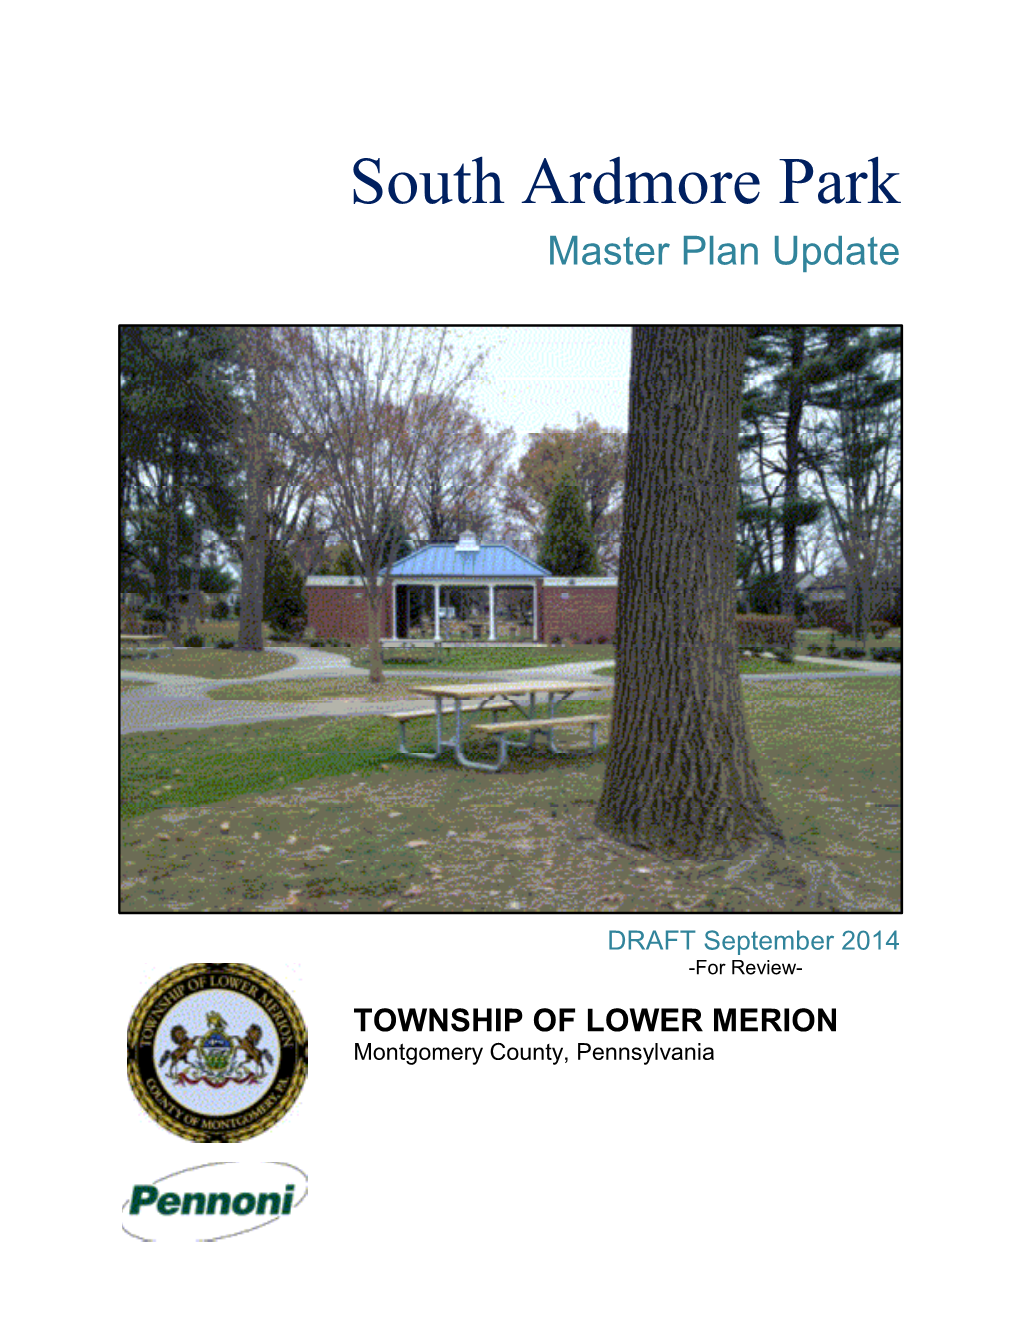 South Ardmore Park Master Plan Update